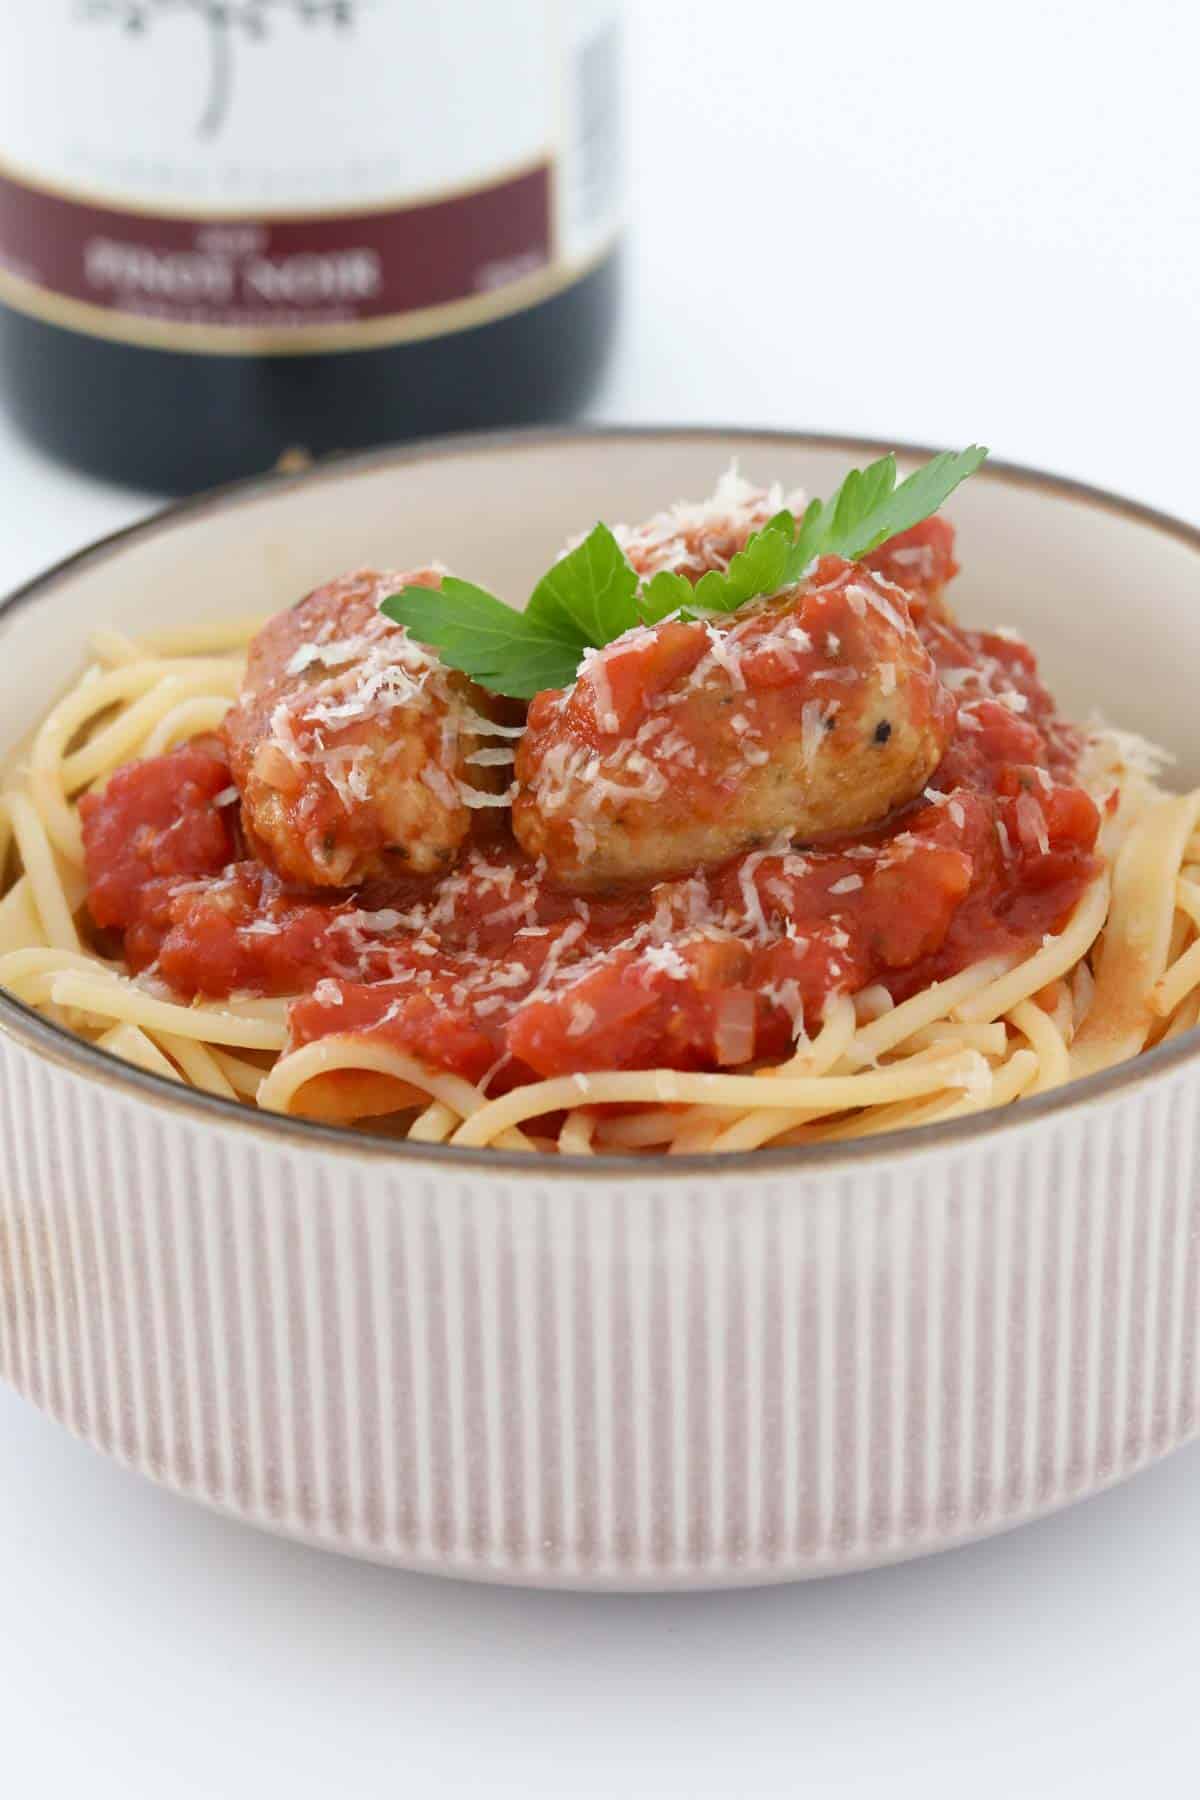 Italian sausage meatballs cooked in tomato based sauce, piled on to a bowl of cooked spaghetti.